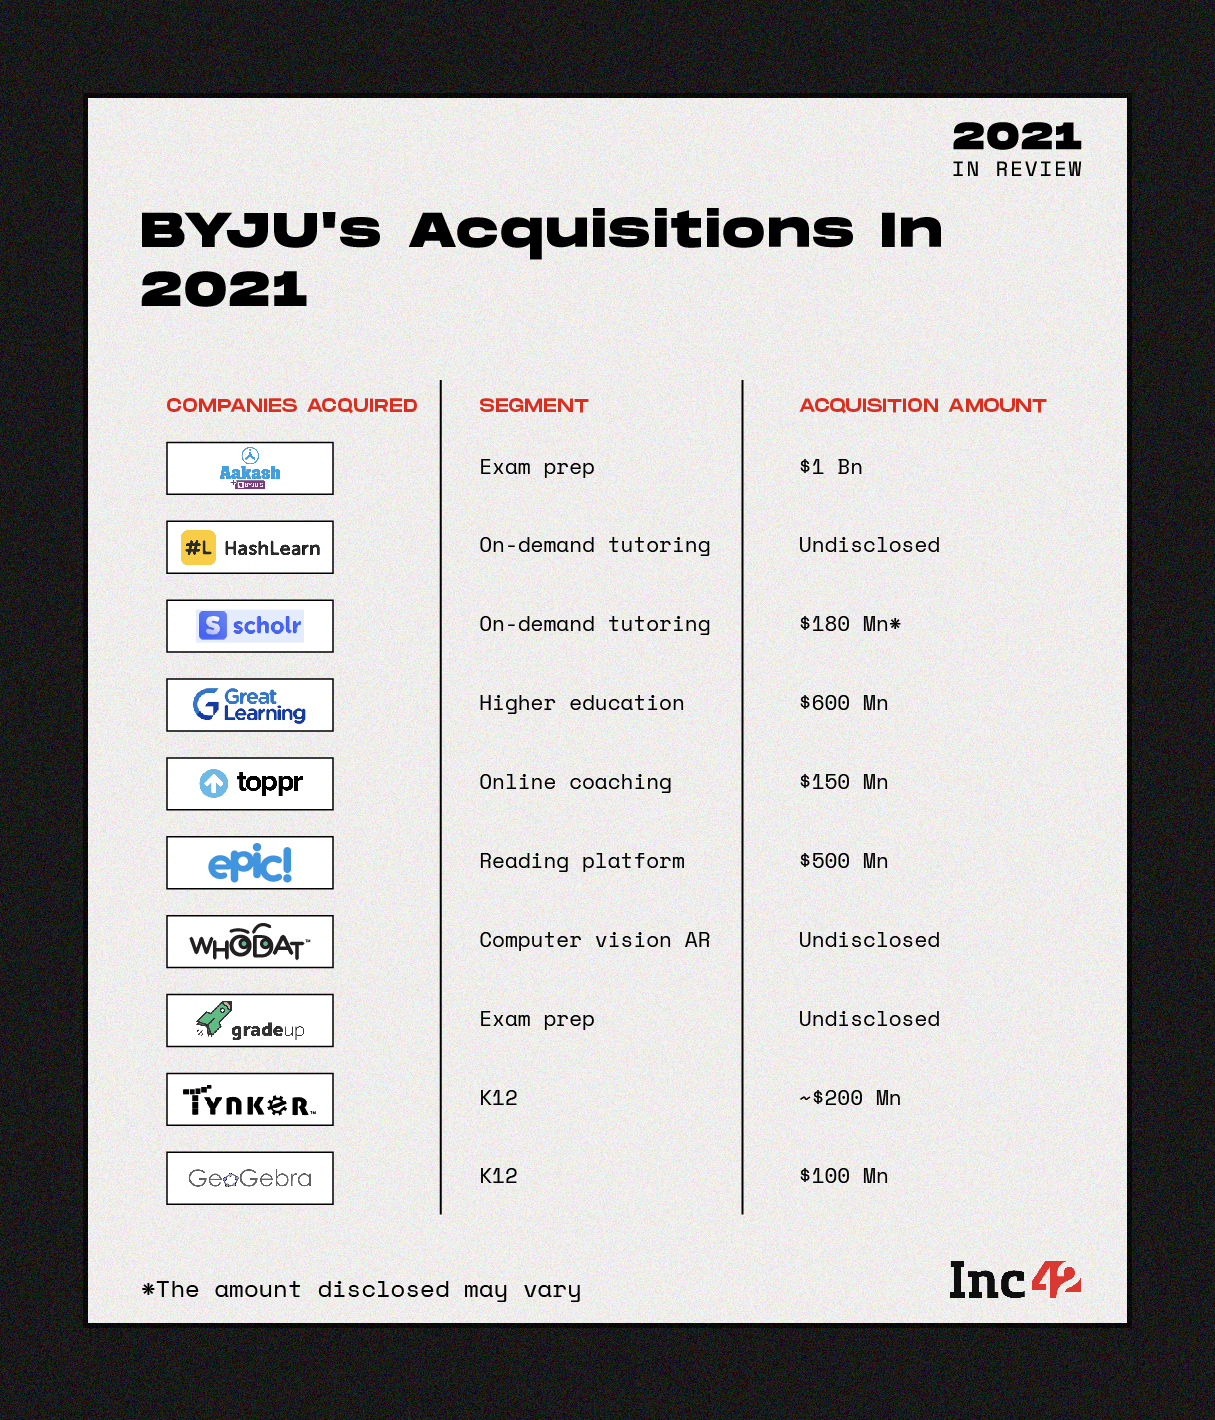 BYJU’s Acquisition Spree Continues Be it funding, scaling, or acquisition– edtech decacorn BYJU’s has been on top of the chain. After acquiring WhiteHat Jr last year for $300 Mn, the IPO-bound startup has acquired a total of 10 edtech startups for over $2.5 Bn, with more under its sleeves. One of the major acquisitions of BYJU’s this year was traditional offline coaching centre Aakash Educational Services for over a $1 Bn. The edtech giant has also grabbed US-based EPIC and Tynker, and most recently Austria’s GeoGebra in a bid to capture international markets.  Following The Lead: Unacademy Closing the gap in terms of subscription count with BYJU’s, Bengaluru-based Unacademy has also acquired four edtech startups-TapChief, Handa Ka Funda, Rheo TV and the latest being Swiflearn to scale its operations. The startup which entered the unicorn club in September last year after picking $150 Mn, is now valued more than $3.44 Bn, making it the second highest valued edtech startup. Good Glamm Group: Strengthening the content to commerce flywheel The beauty ecommerce platform MyGlamm’s parent not just achieved the unicorn club status this year, but also positioned itself as a house of brands following the content-to-commerce model. The company with its acquisition of ScoopWhoop, MissMalini, and POPxo has strengthened its grip on the content commerce market, whereas with acquisition of MomsCo and BabyChakra it has expanded its product portfolio. Well that's all folks, wait up for our annual funding report for more insights on how M&A changed in this year.